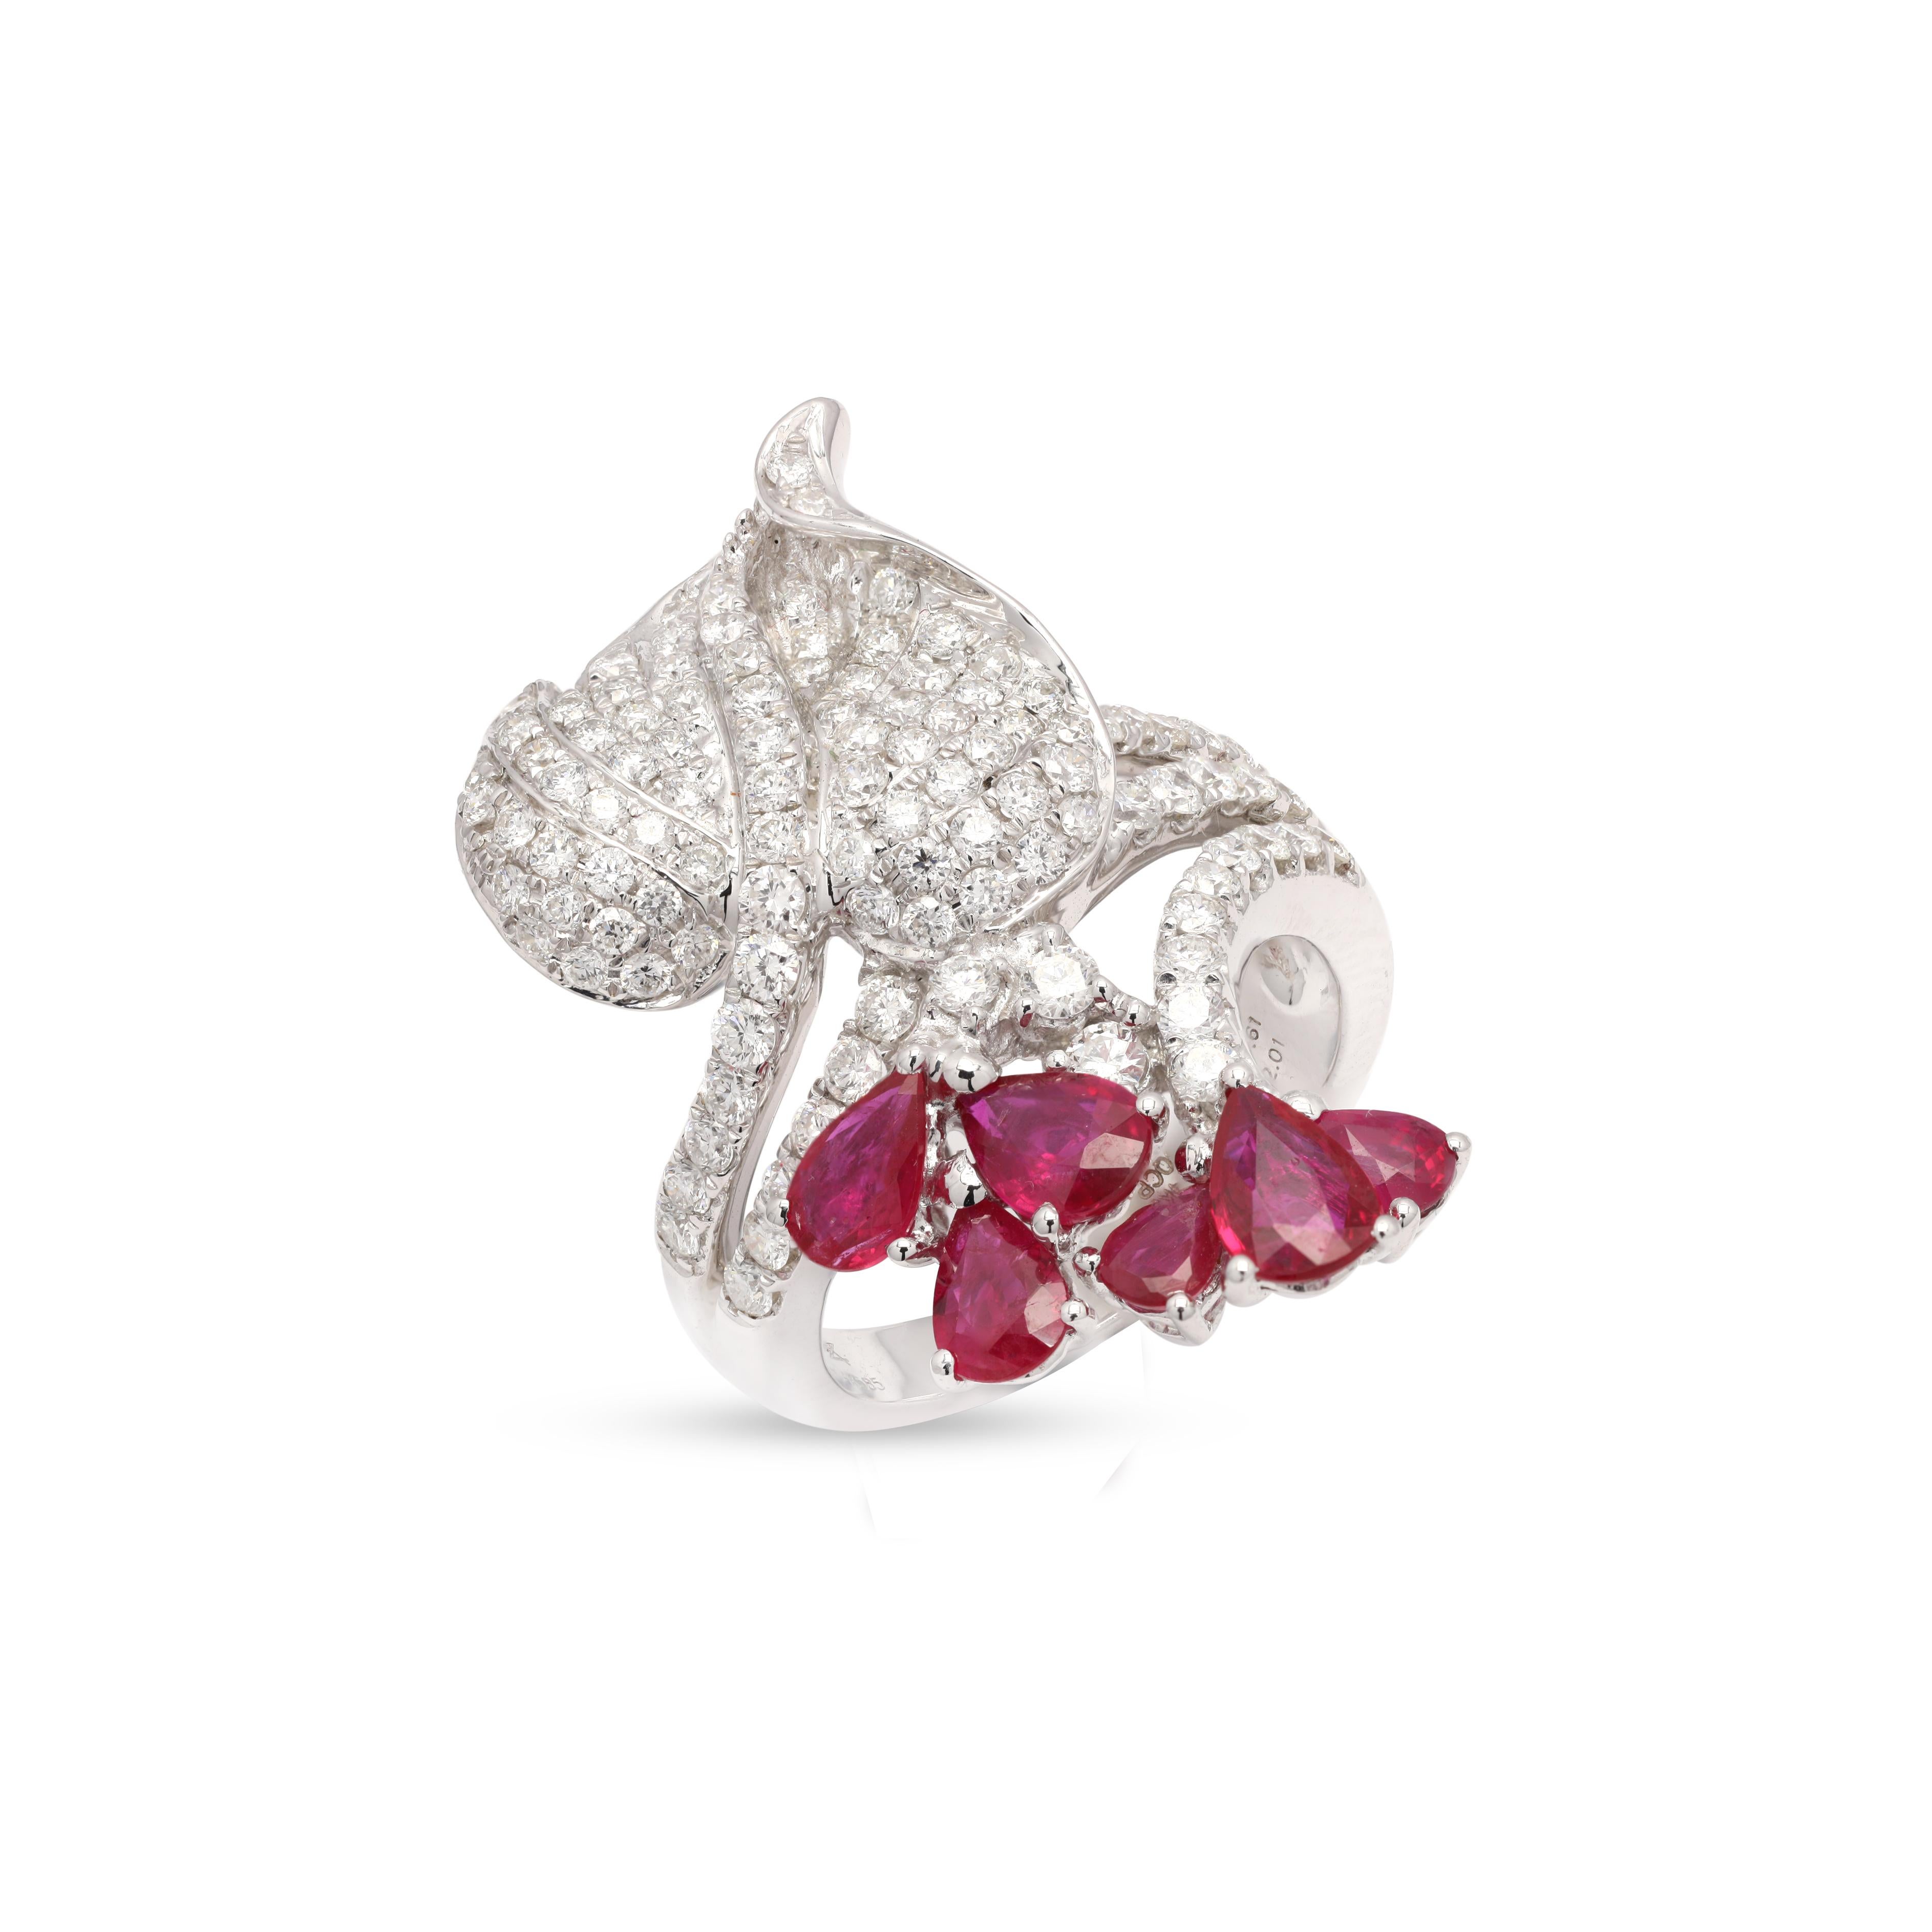 For Sale:  14K White Gold Pear Cut Ruby and Diamond Bridal Ring 3